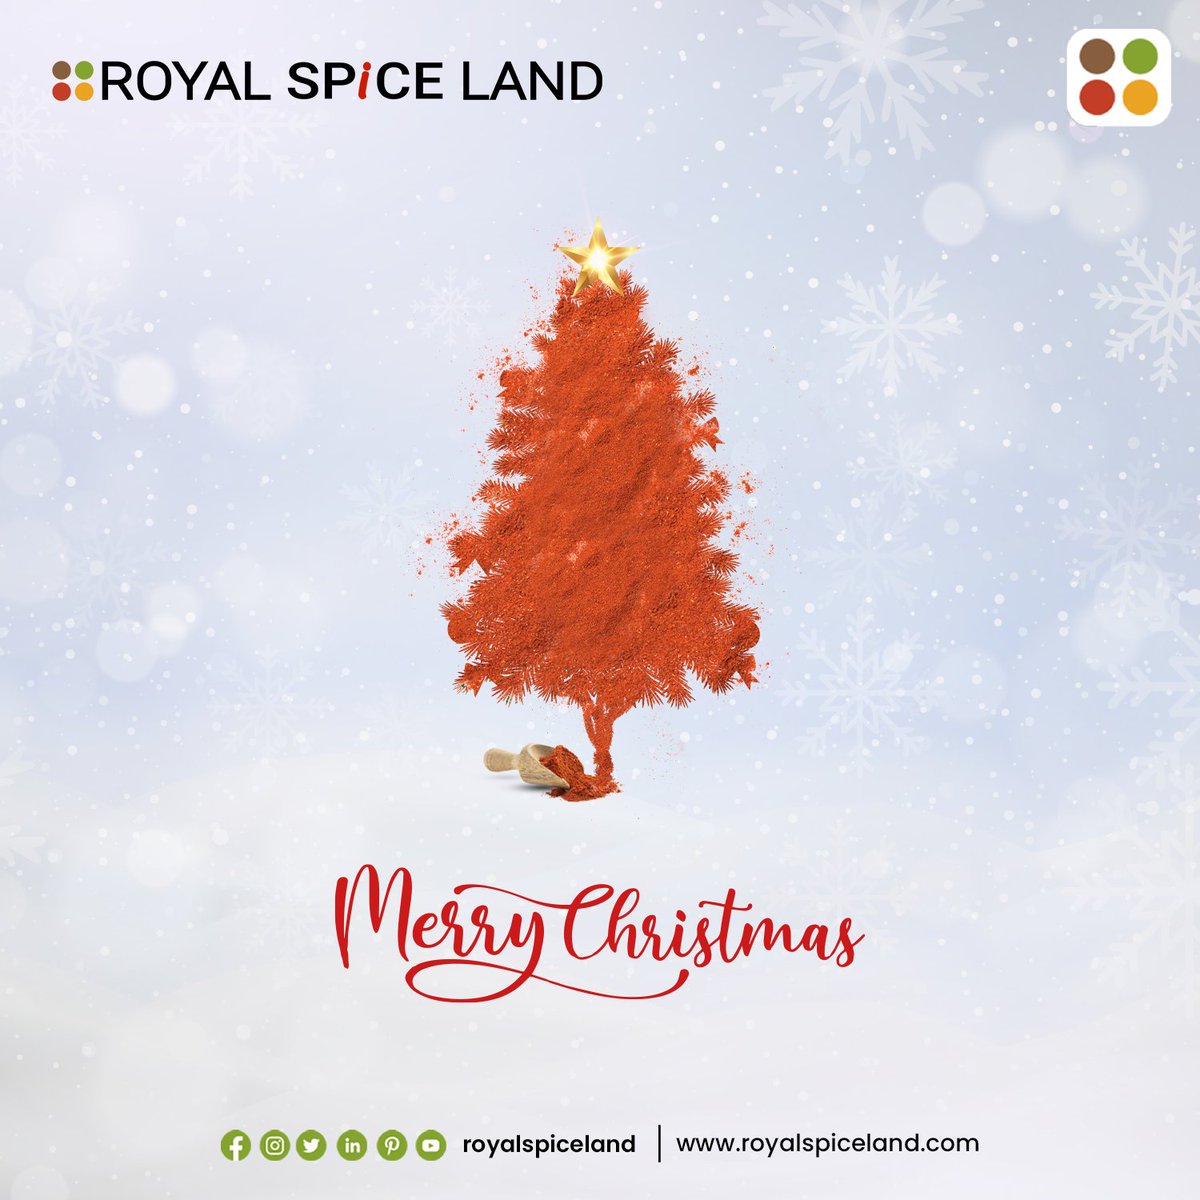 Merry Christmas! Many good wishes for the holiday season and the coming year.
#royalspiceland #christmas2021 #happychristmas #merrychristmas